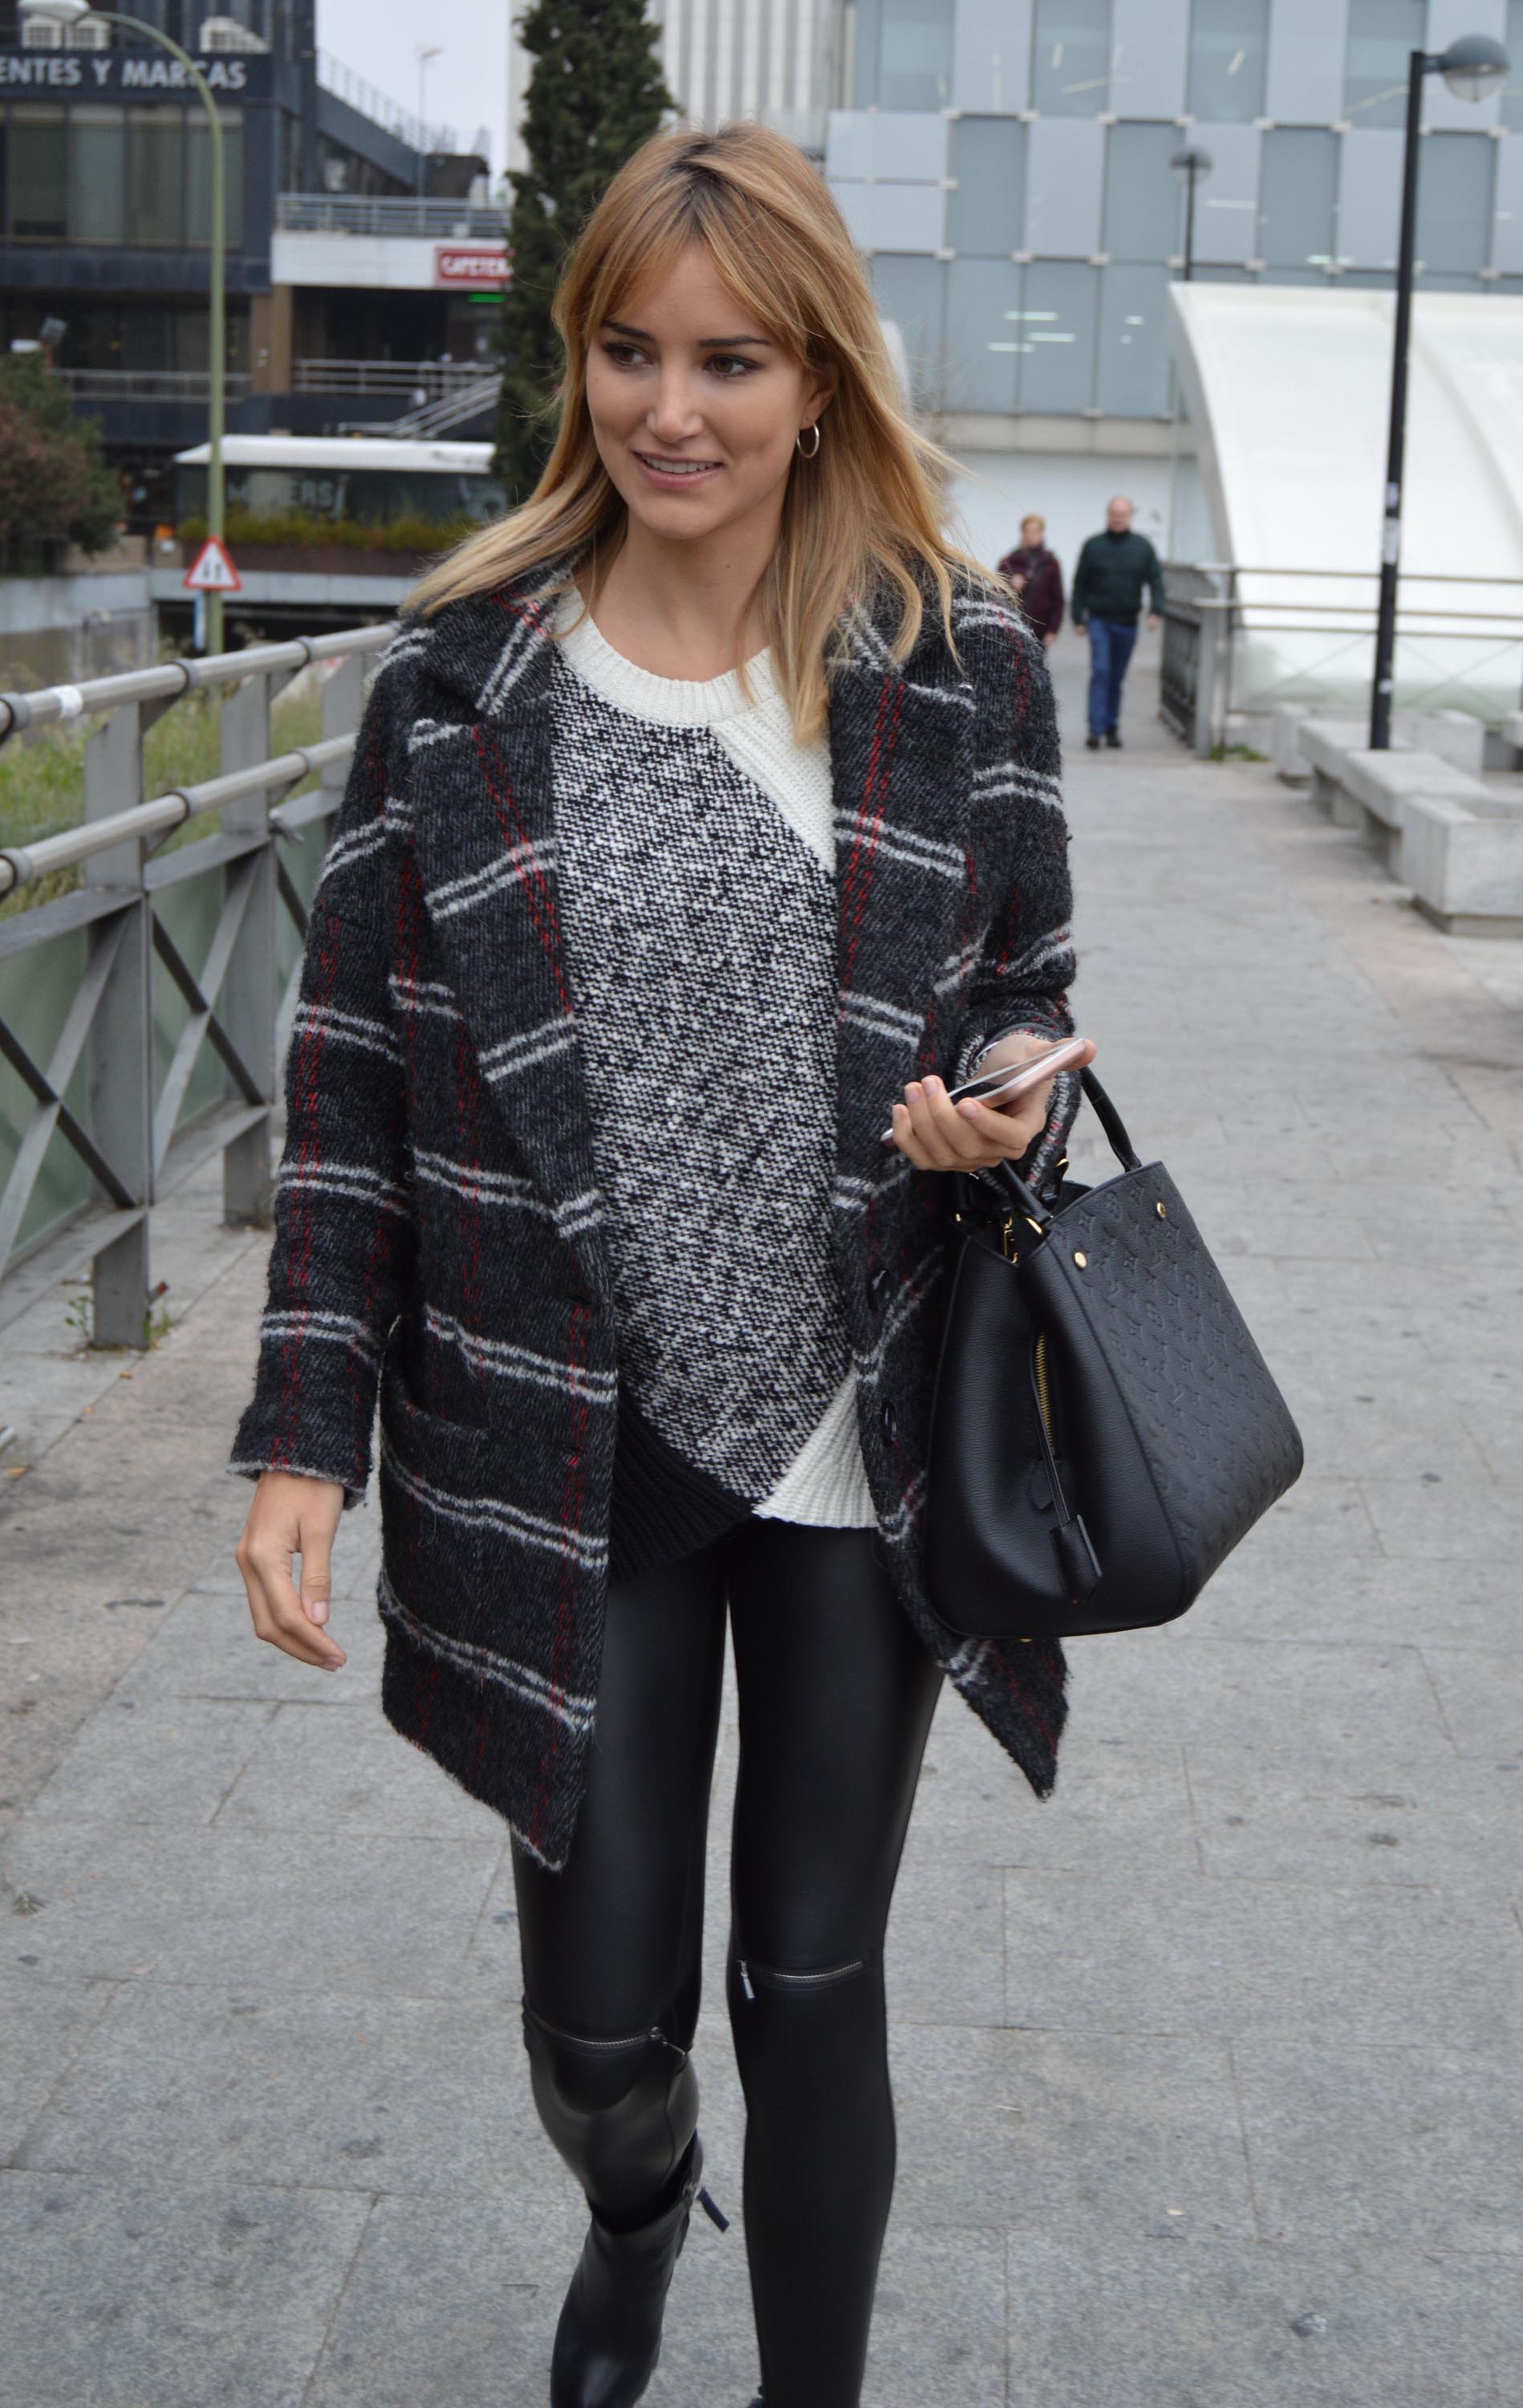 Alba Carrillo is seen in Madrid